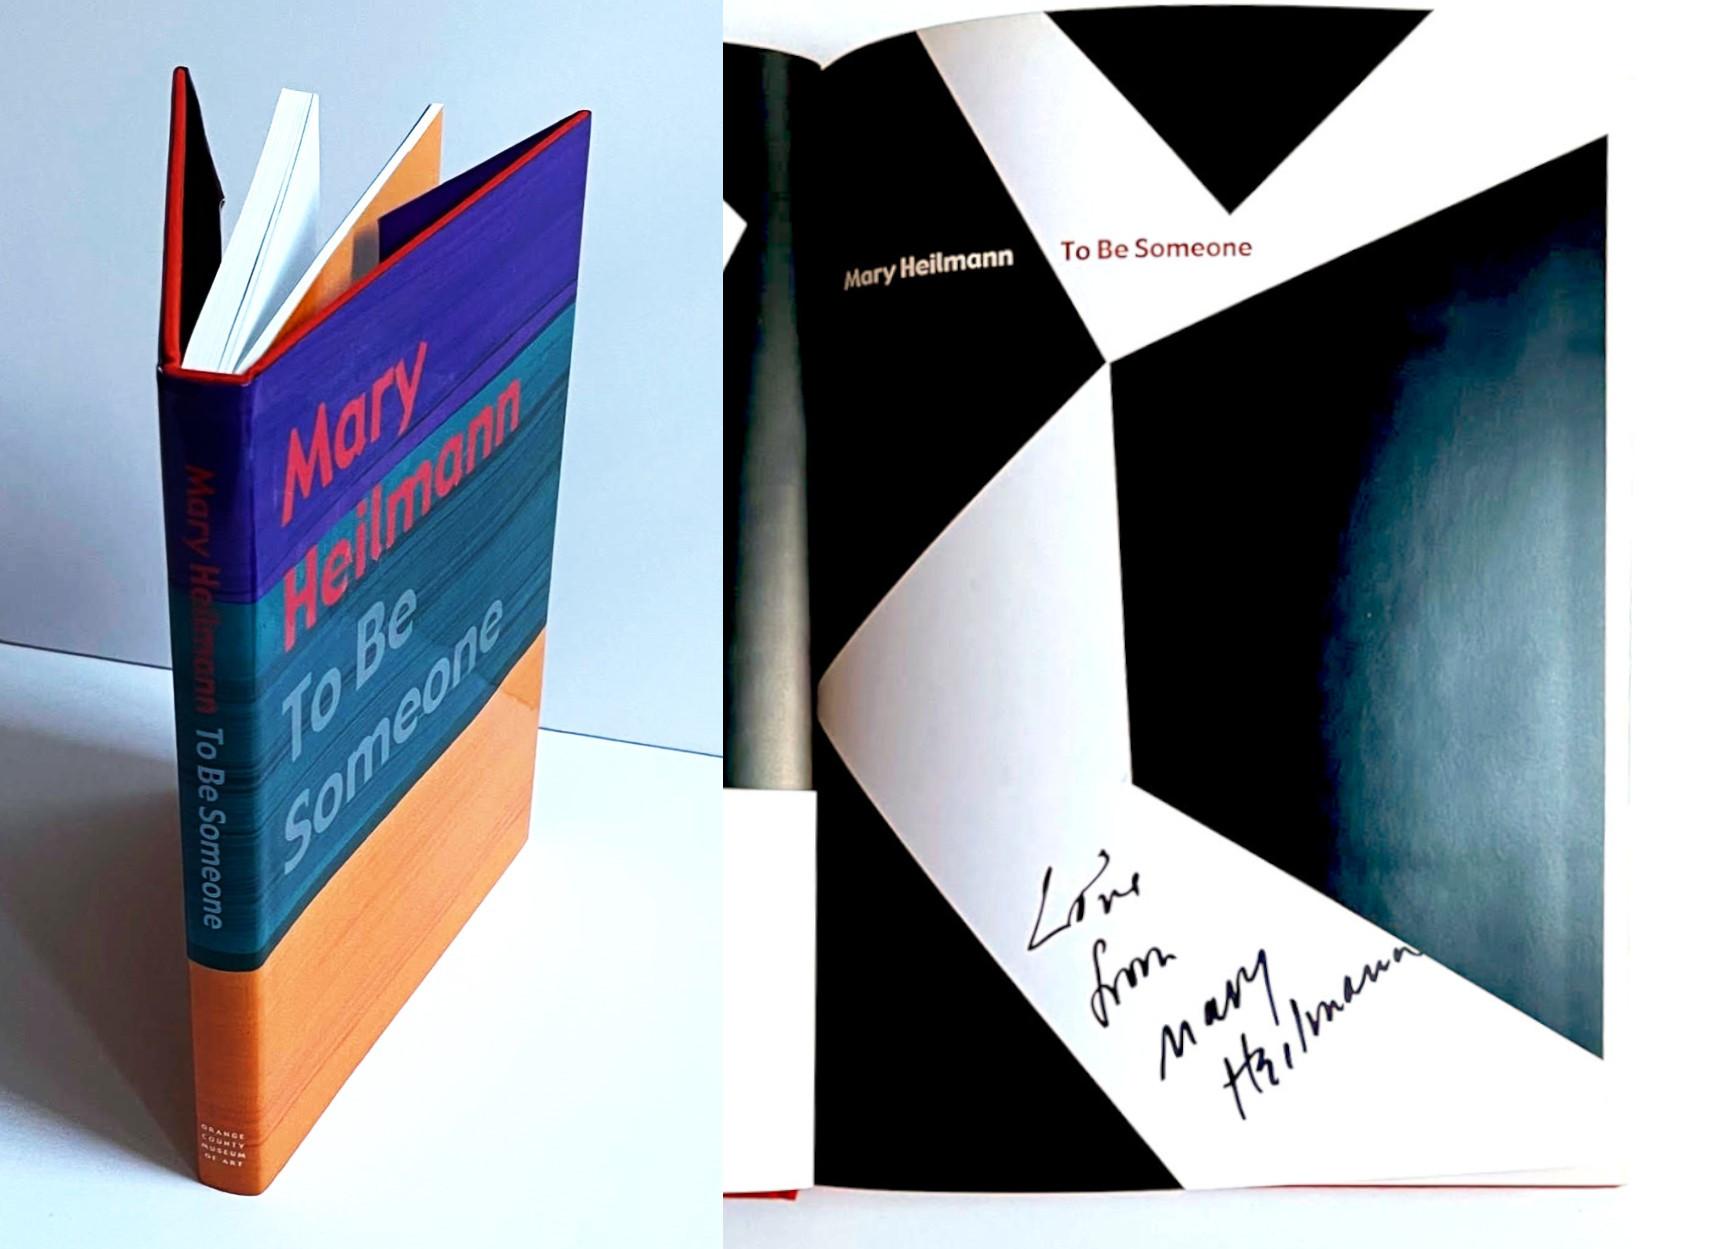 Mary Heilmann
To Be Someone (hand signed and inscribed "Love from Mary Heilmann"), 2007
Hardback monograph with dust jacket (hand signed and inscribed by Mary Heilmann)
Warmly signed with love by Mary Heilmann on the half title page
10 3/4 × 8 × 1